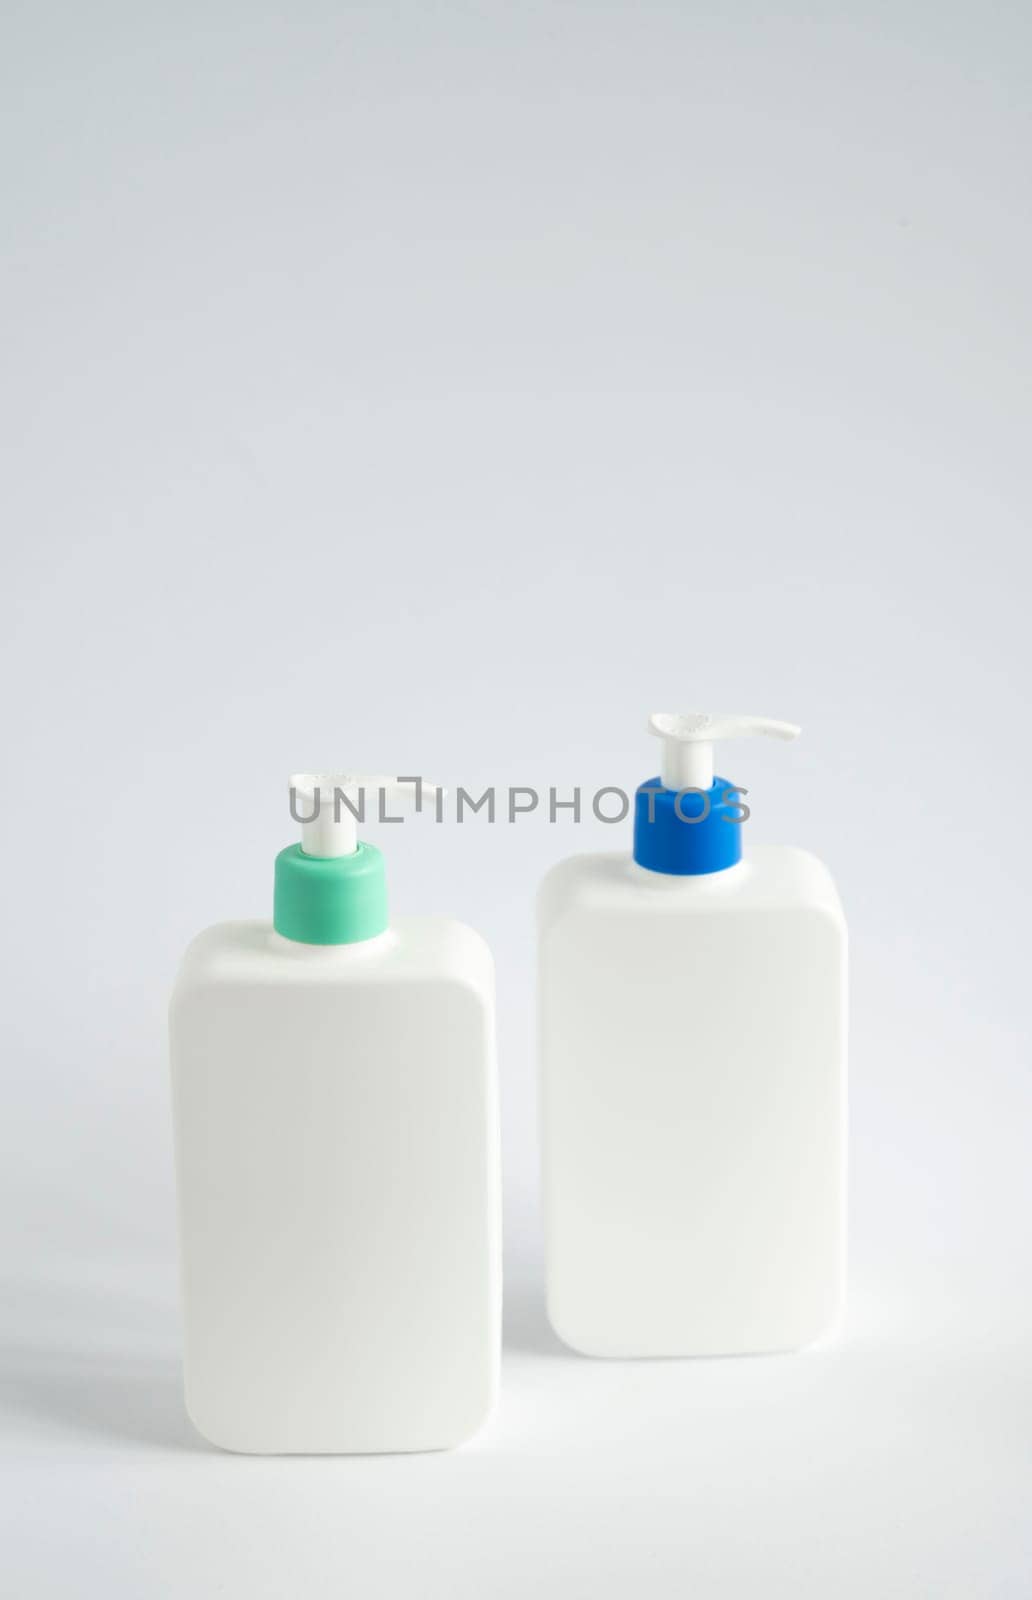 Two liquid containers for shampoo, gel, lotion, cream, bath foam etc. Blank unbranded cosmetic plastic bottles with dispenser pump